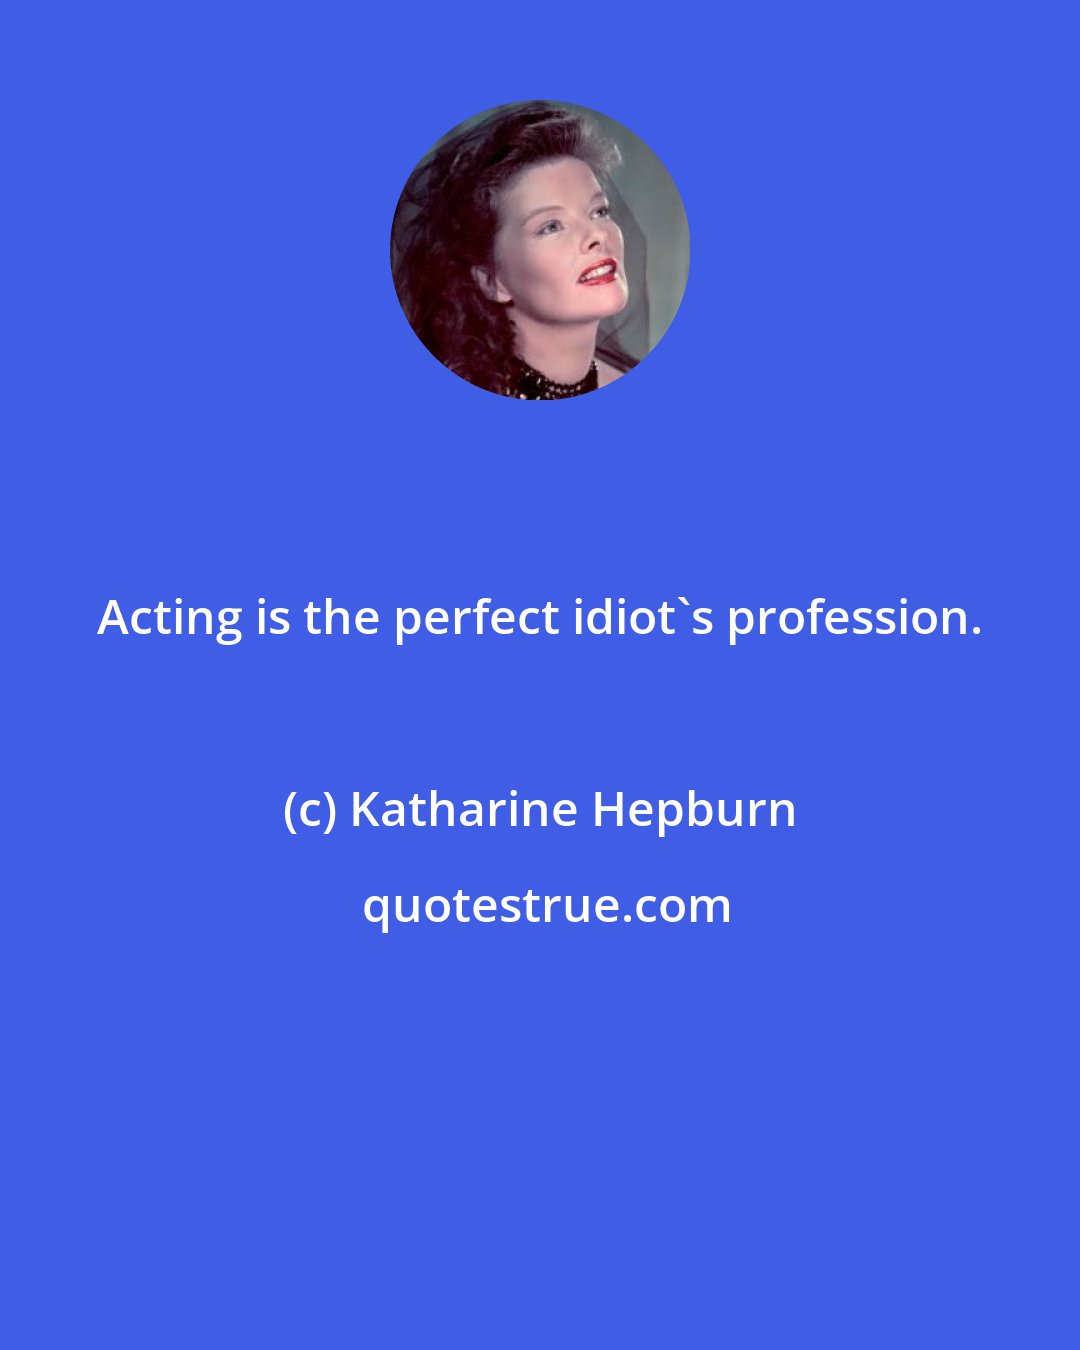 Katharine Hepburn: Acting is the perfect idiot's profession.